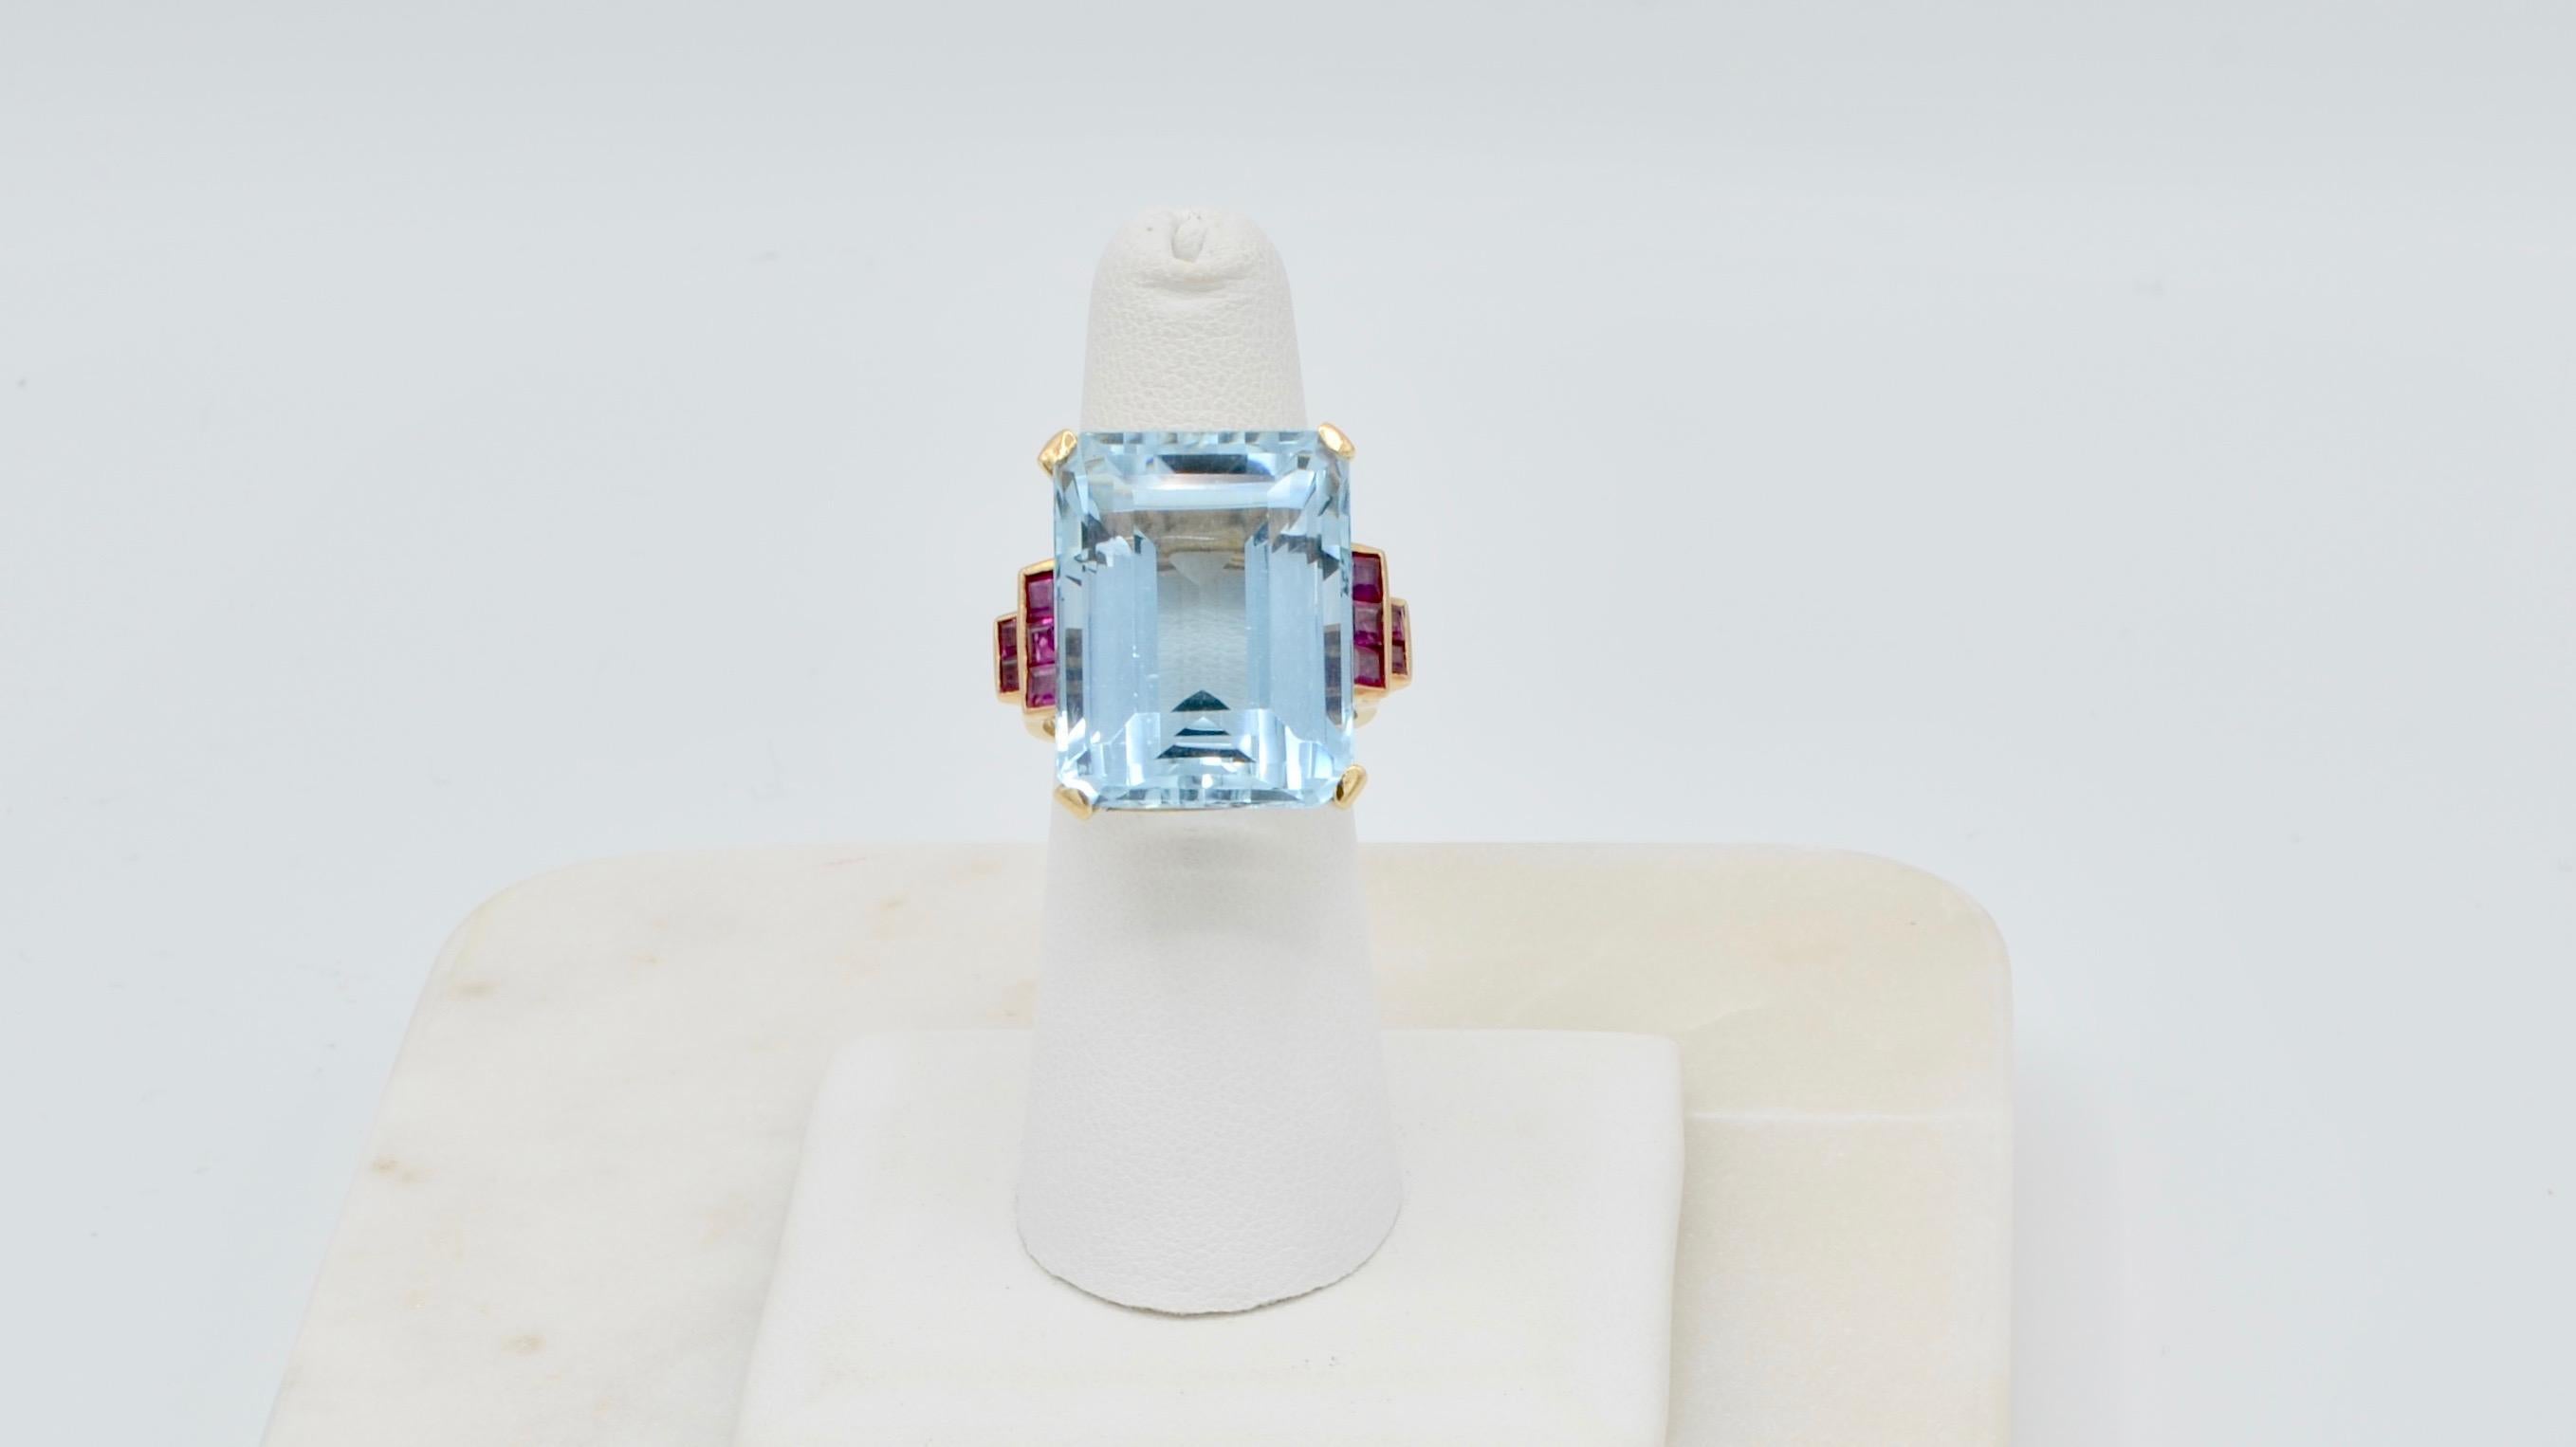 This beautiful rectangle step cut aquamarine is a medium tone and transparent weighing in at 31 carats. The setting is 14 karat yellow gold size 6 with two beads inside the band to balance the weight. It has ten channel set square step cut natural